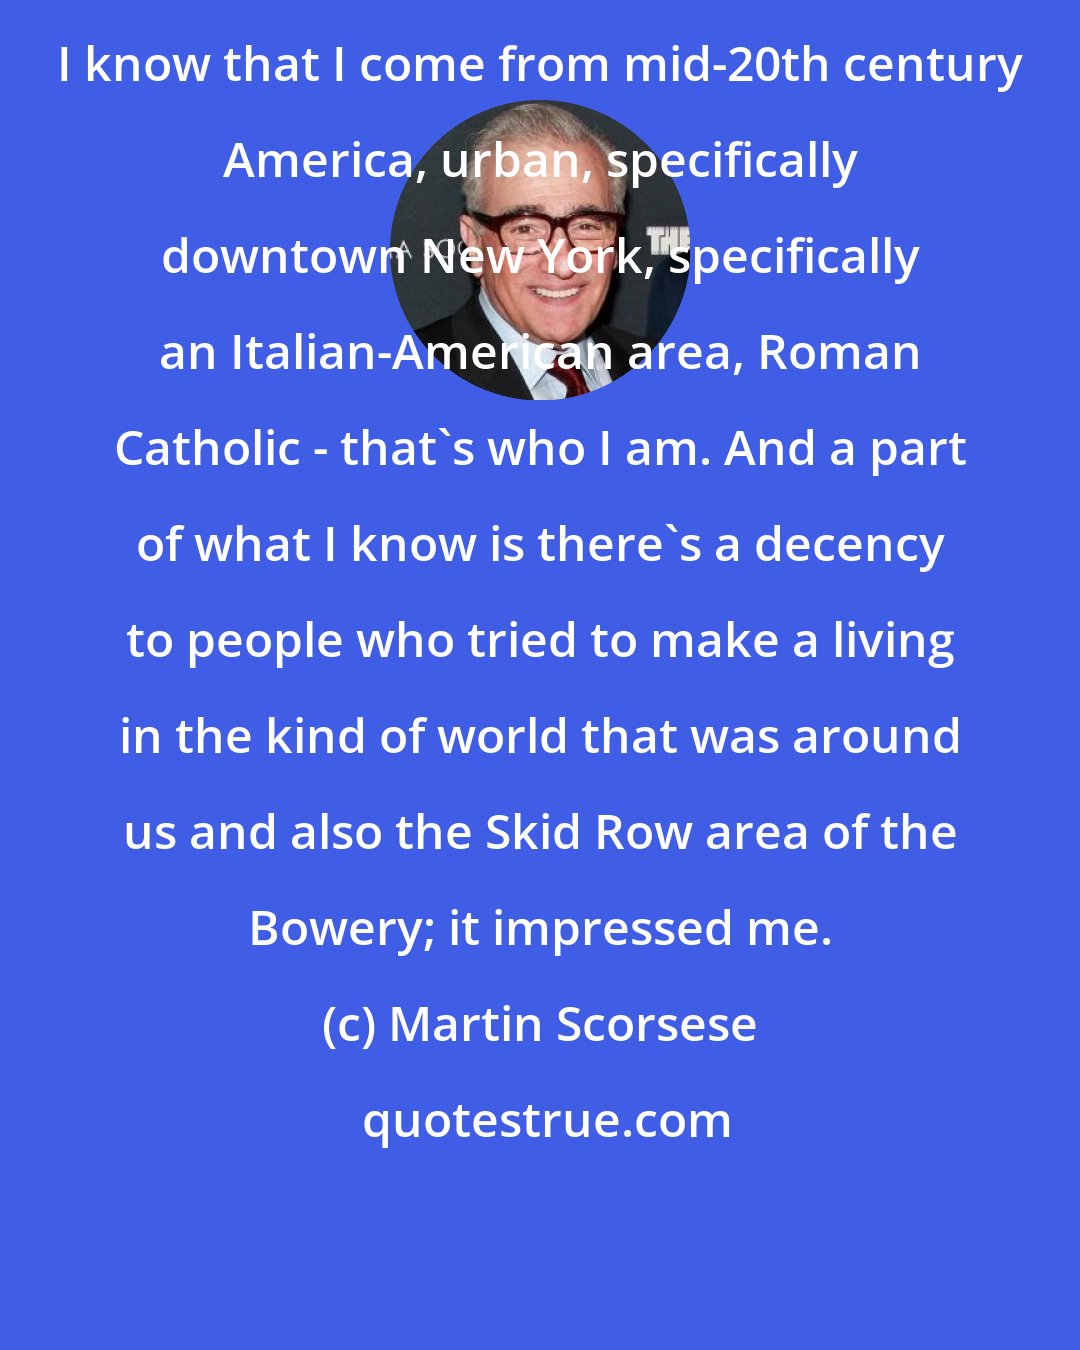 Martin Scorsese: I know that I come from mid-20th century America, urban, specifically downtown New York, specifically an Italian-American area, Roman Catholic - that's who I am. And a part of what I know is there's a decency to people who tried to make a living in the kind of world that was around us and also the Skid Row area of the Bowery; it impressed me.